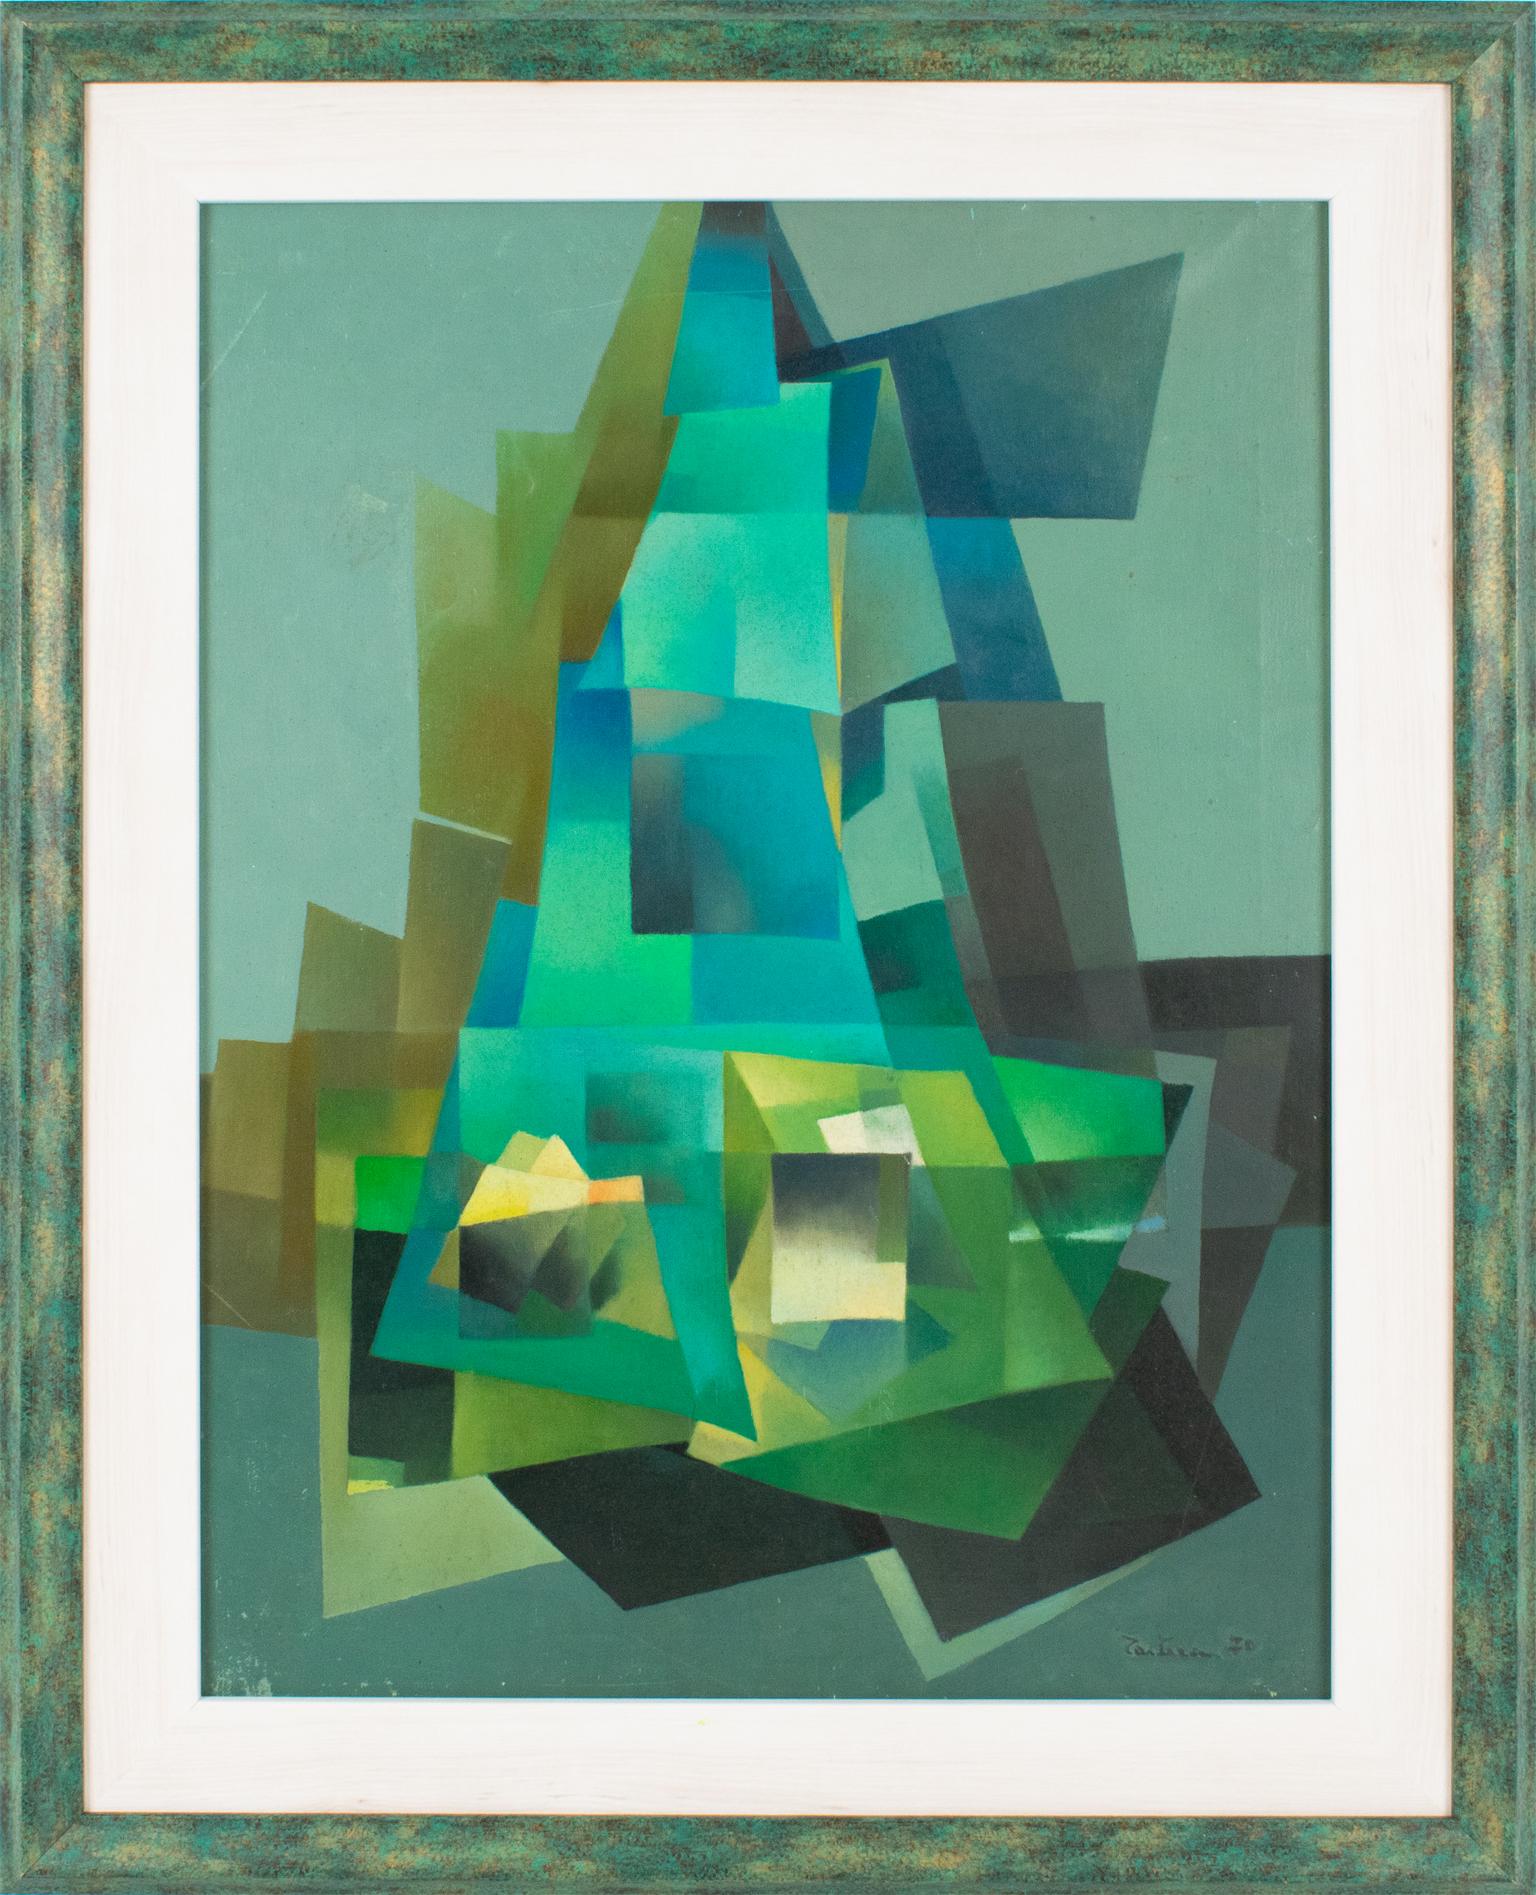 Ivo Tartarini (1912 - 1993) designed this stylish cubist constructivist oil on canvas painting.
This skillful composition and scrupulous construction use contrasting colors with turquoise and green hues. Ivo Taratarini explores the variations of